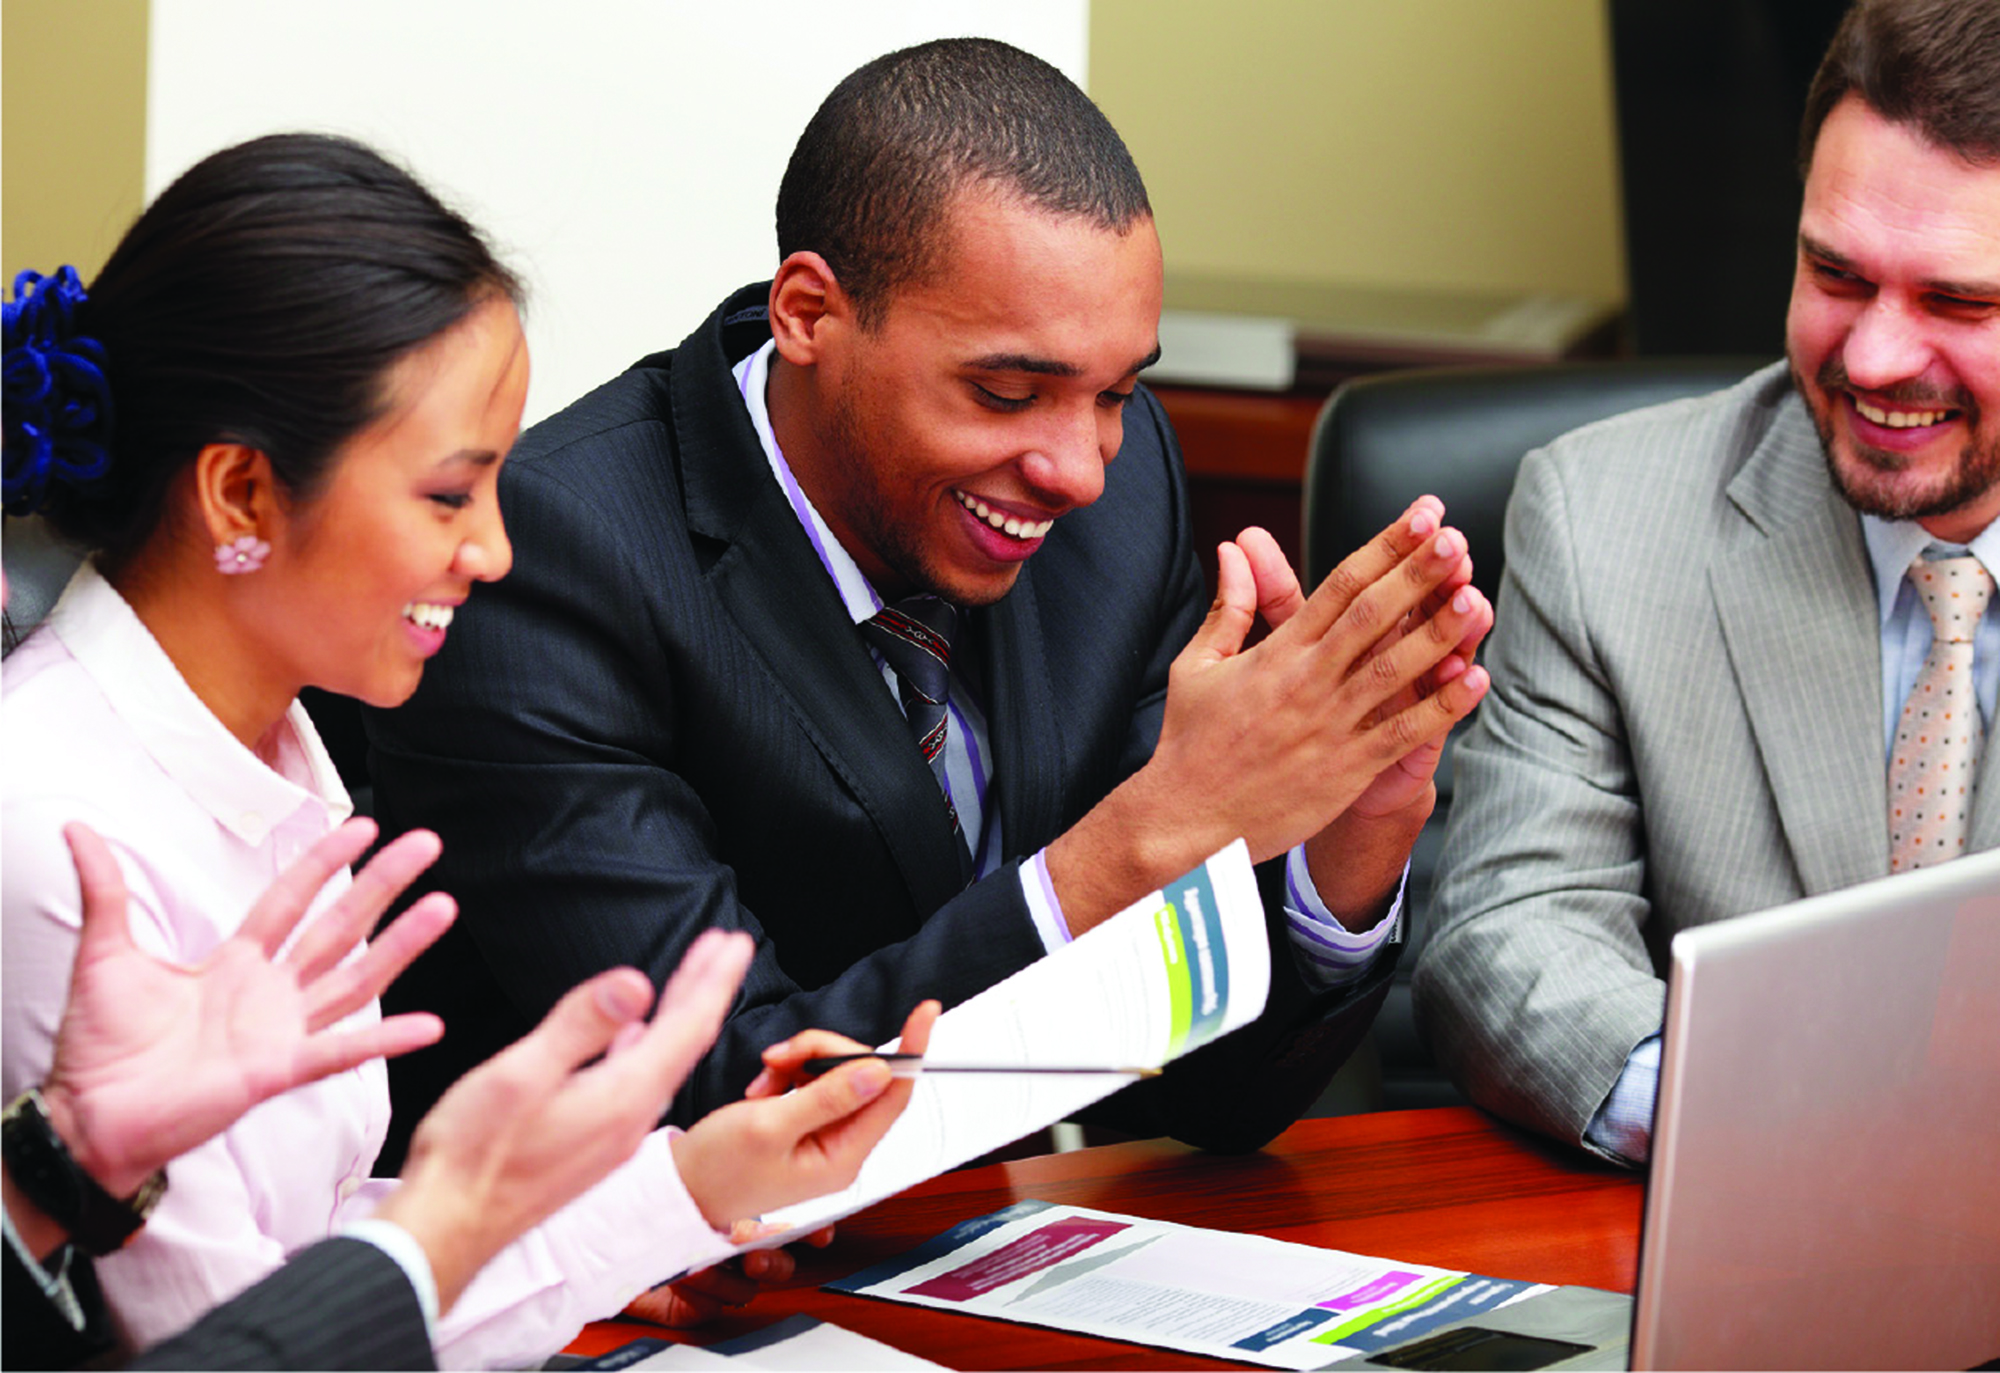 image of a group of people laughing in a business meeting